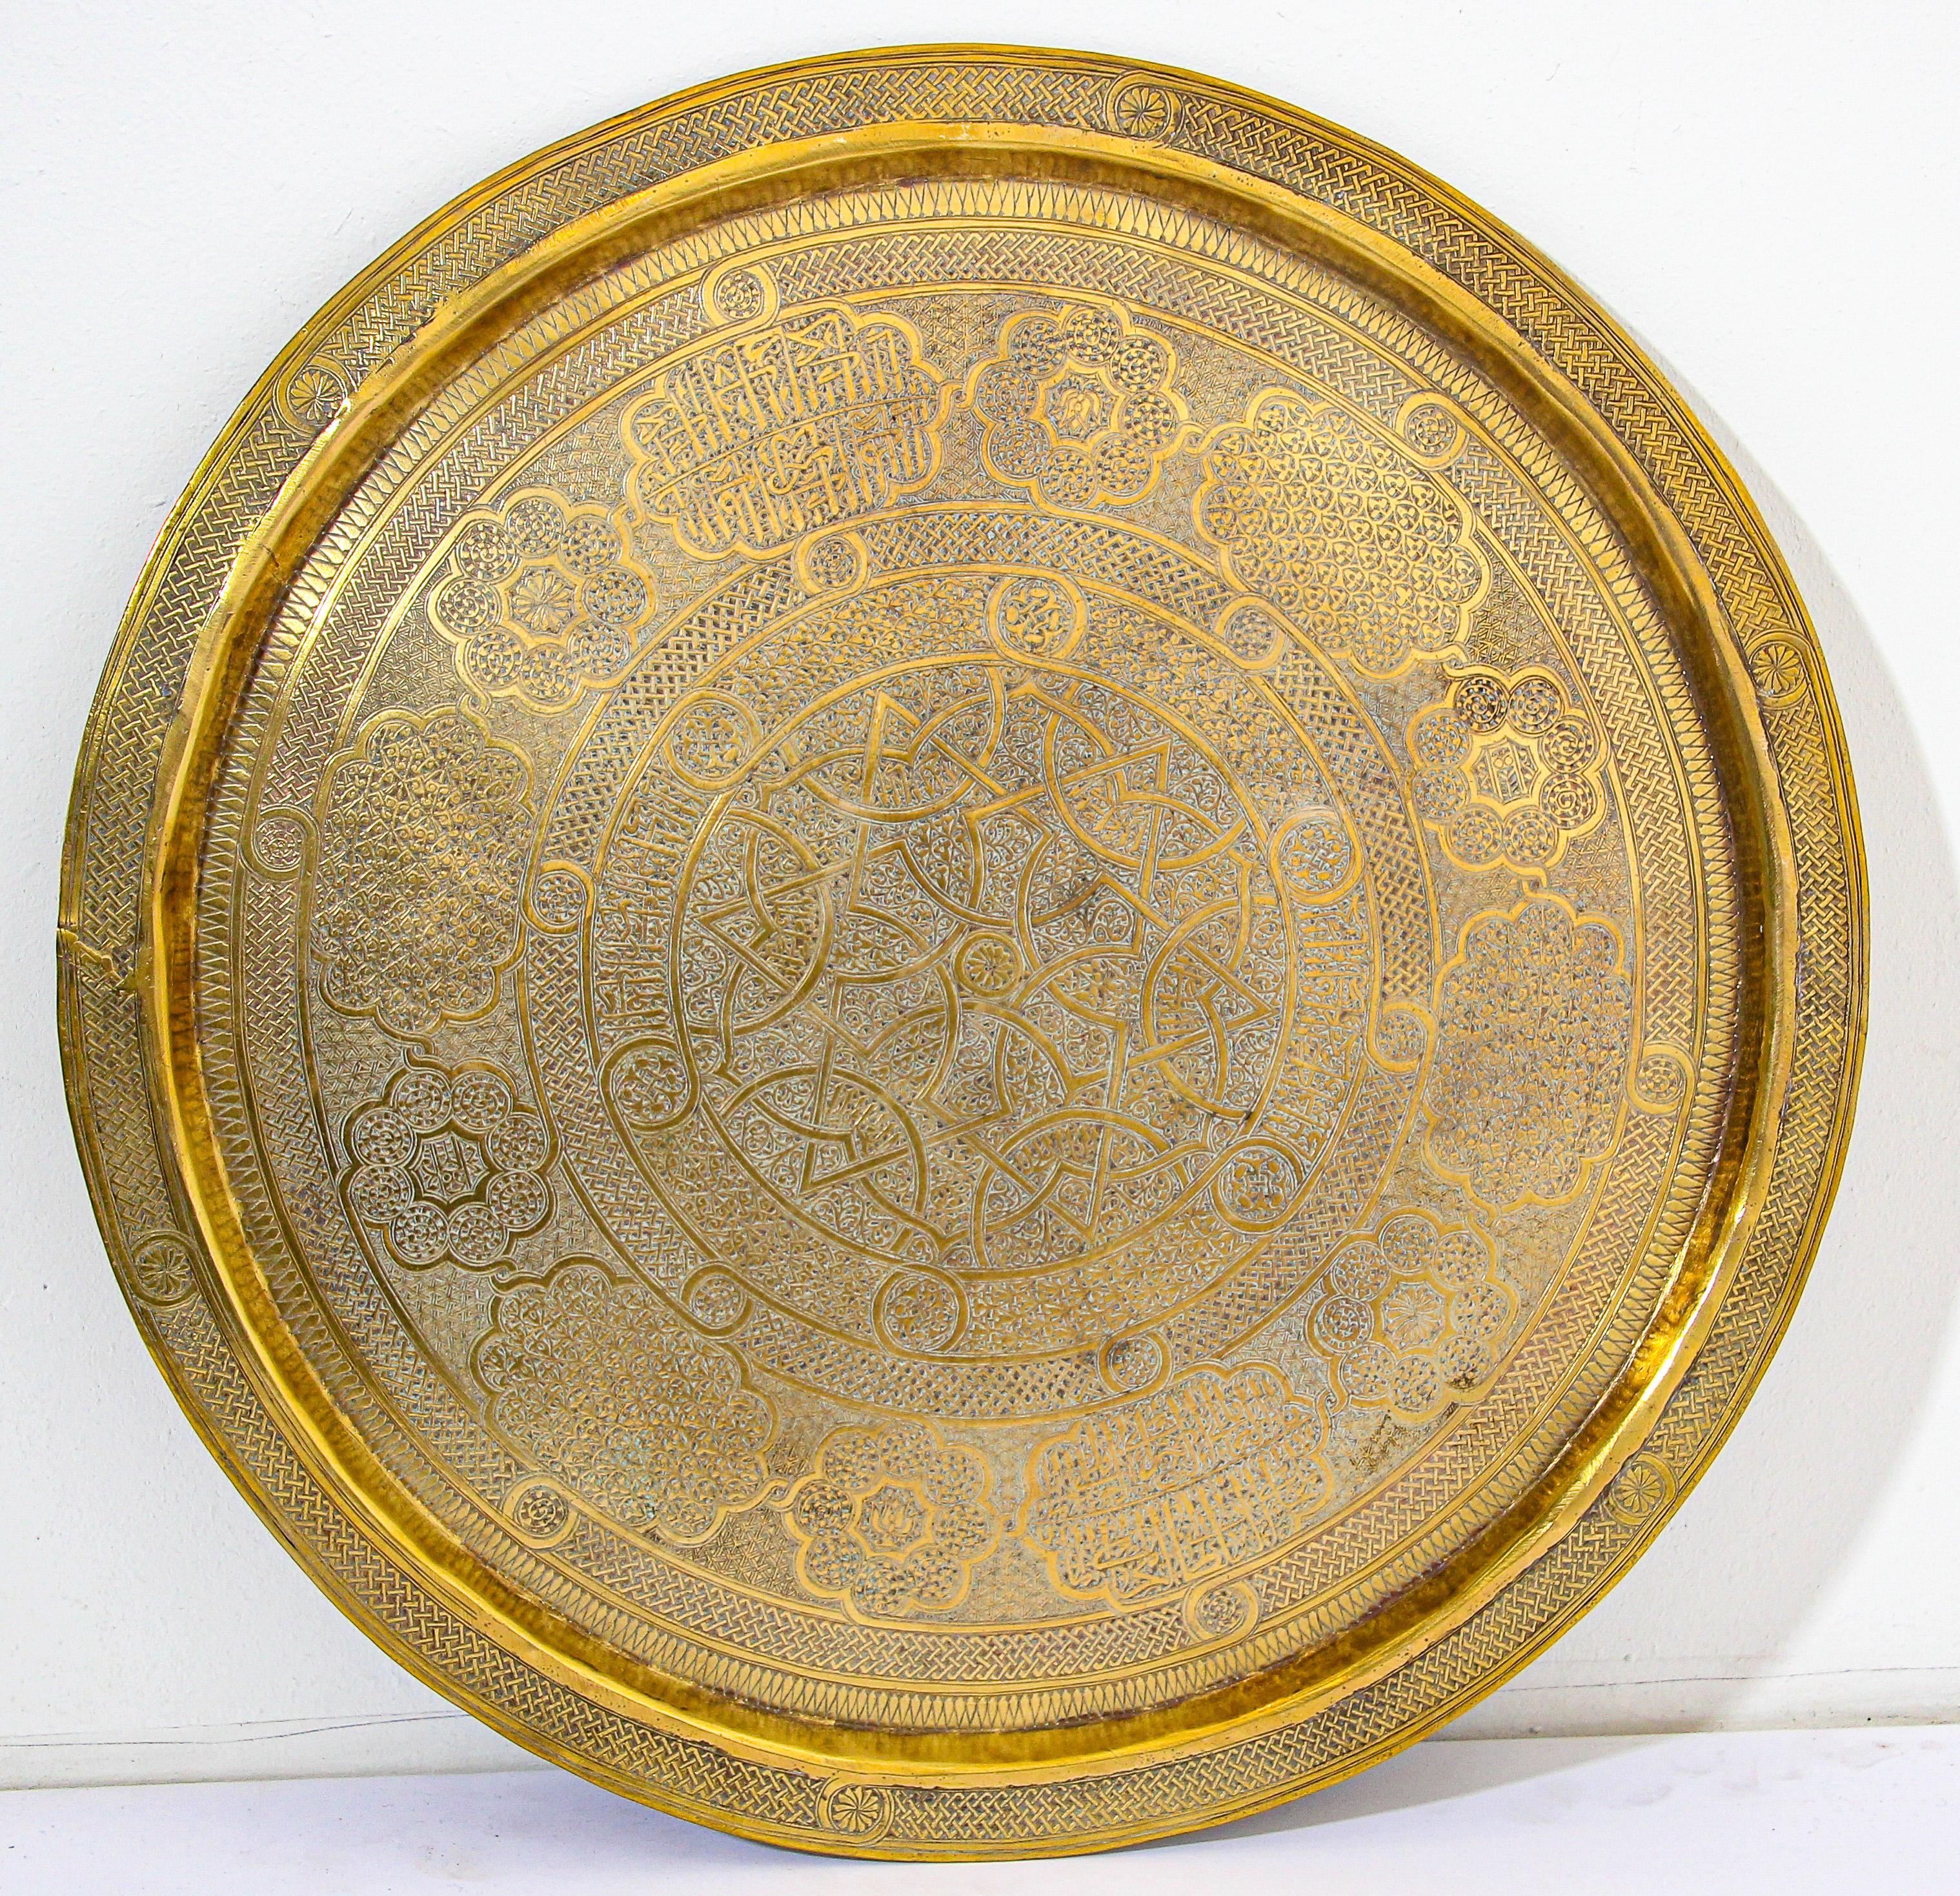 19th century Mughal Indo Persian fine antique brass round tray hand chased with Islamic calligraphy in Mameluke style.
19th century collector museum quality piece Mughal India style.
Heavy solid gold polished brass, embossed and hand graved with